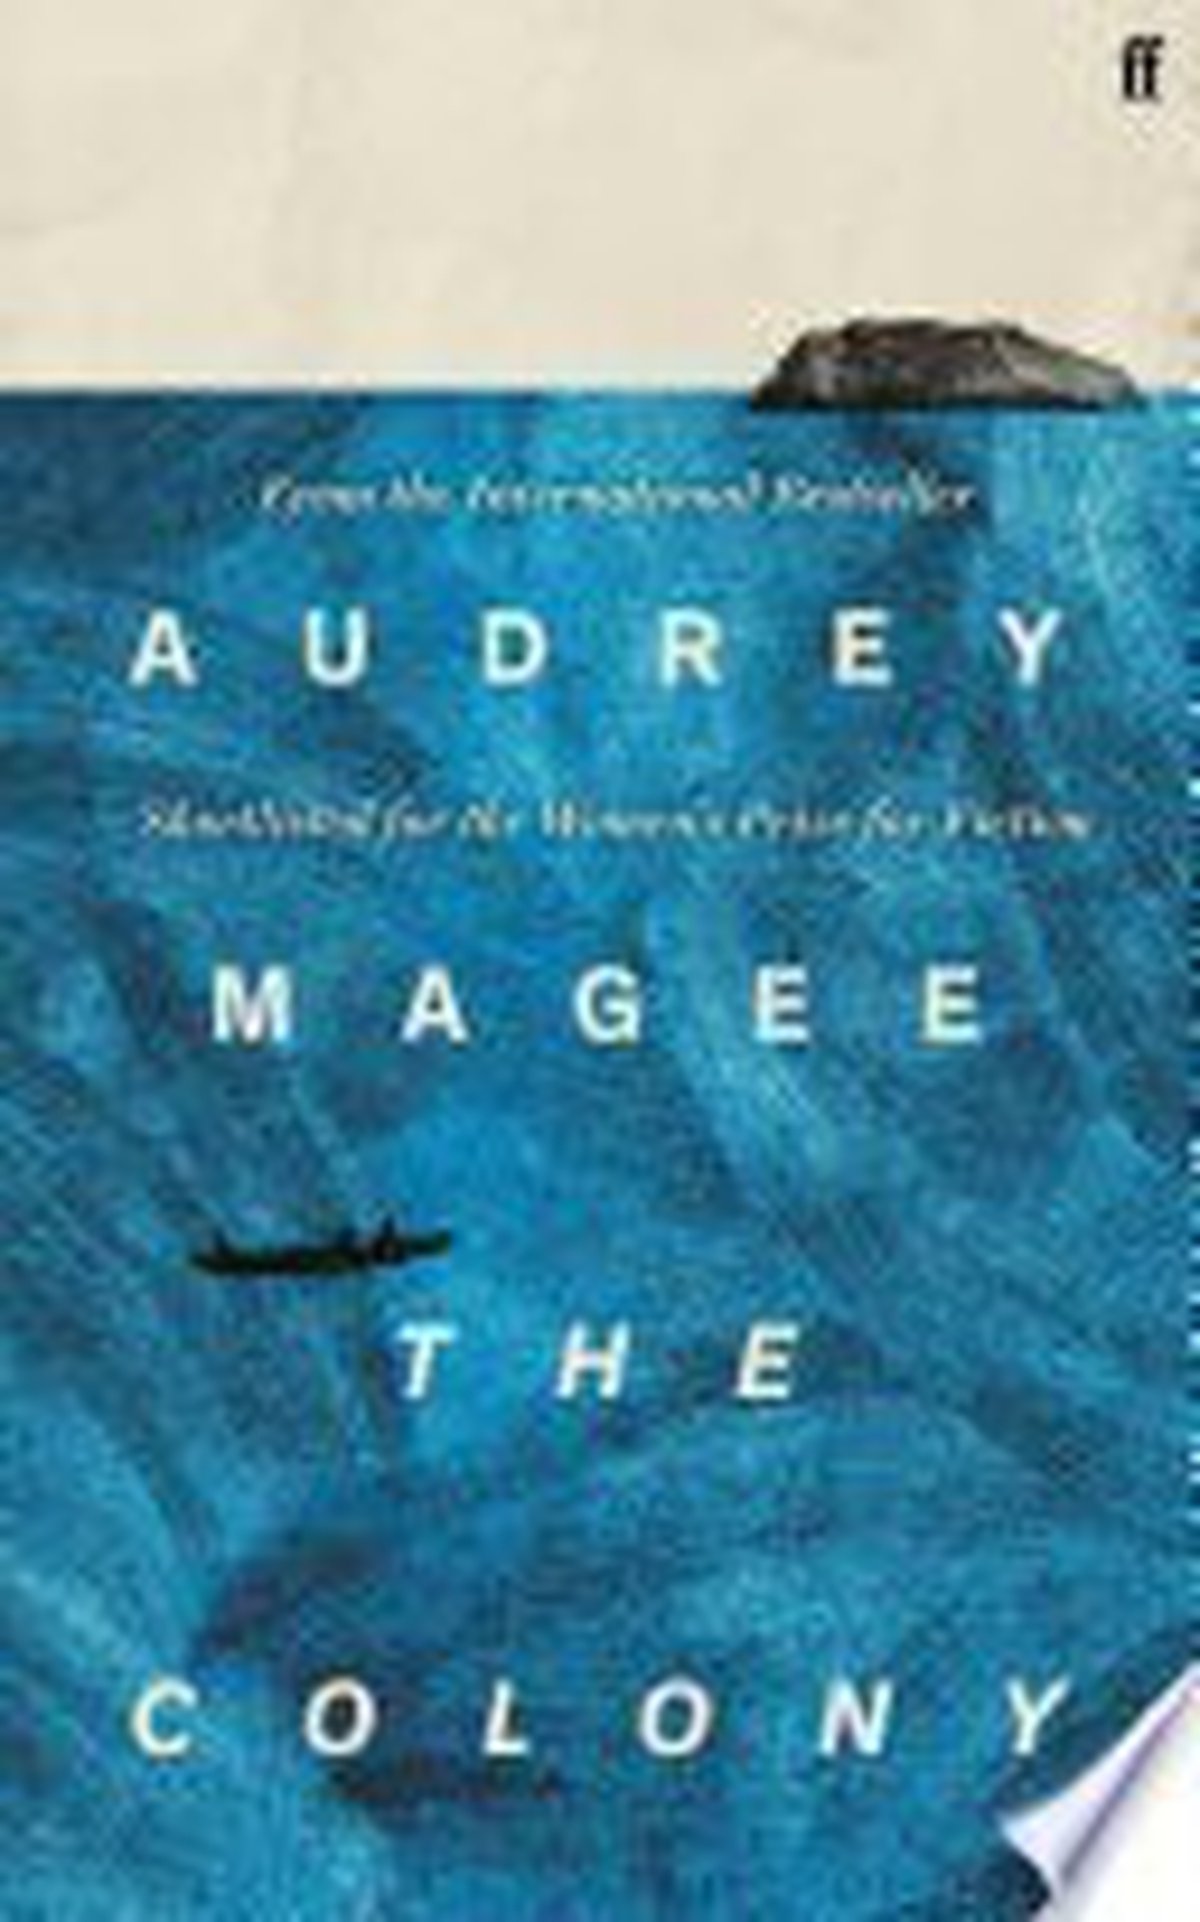 Audrey Magee’s new book The Colony